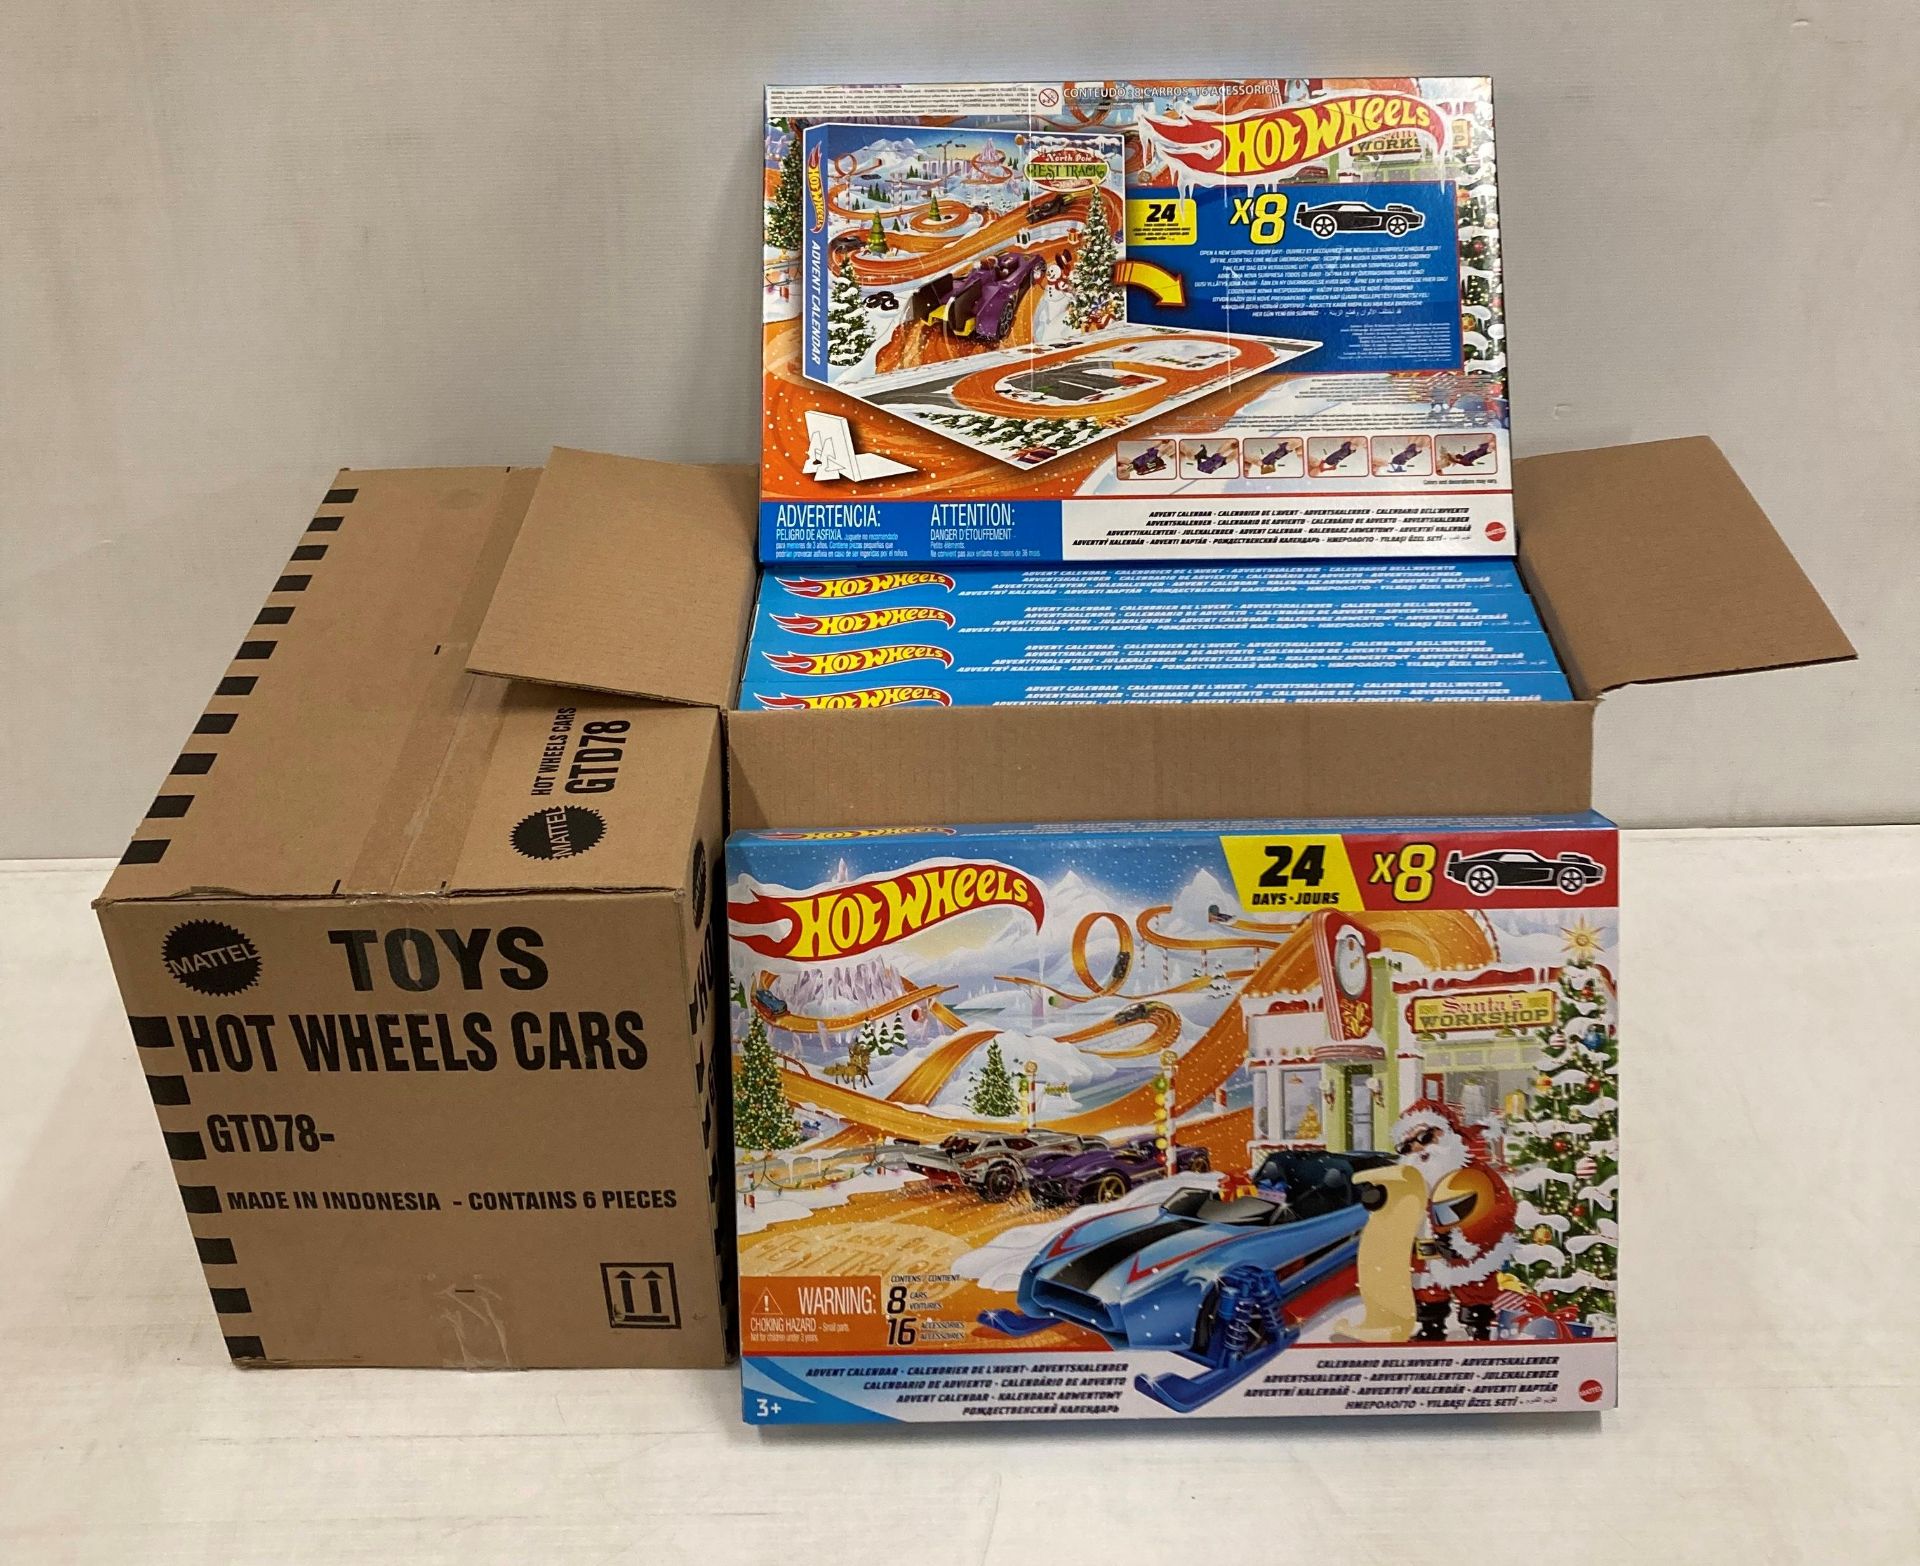 12 x Hot Wheels Advent Calendars RRP £28 each - containing 8 x cars and 16 x accessories (2 x outer